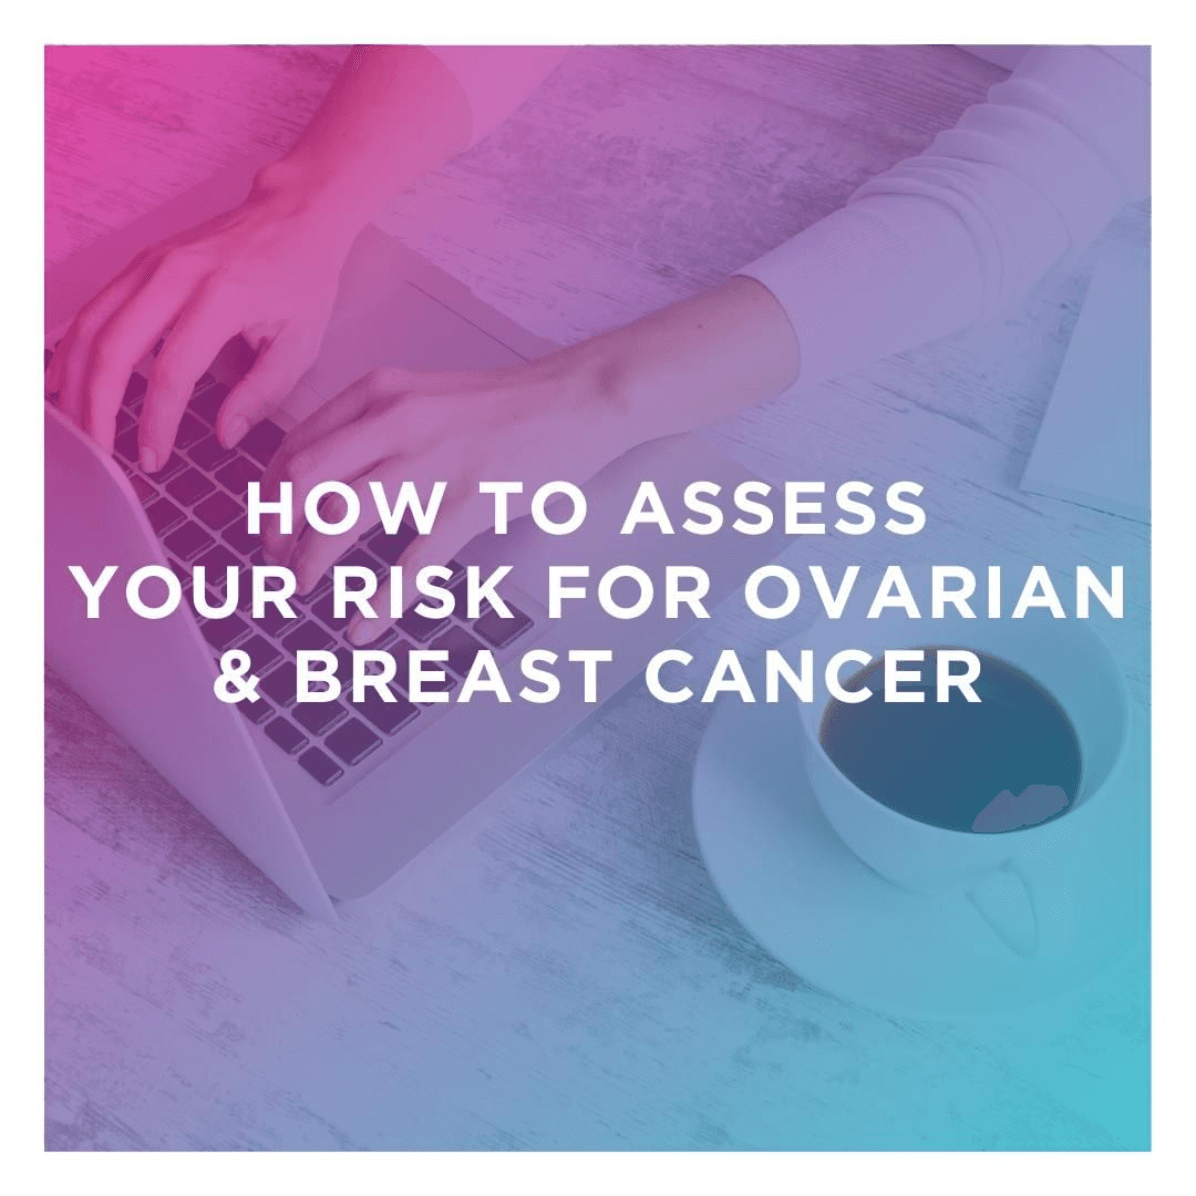 how-to-assess-risk-ovarian-breast-cancer